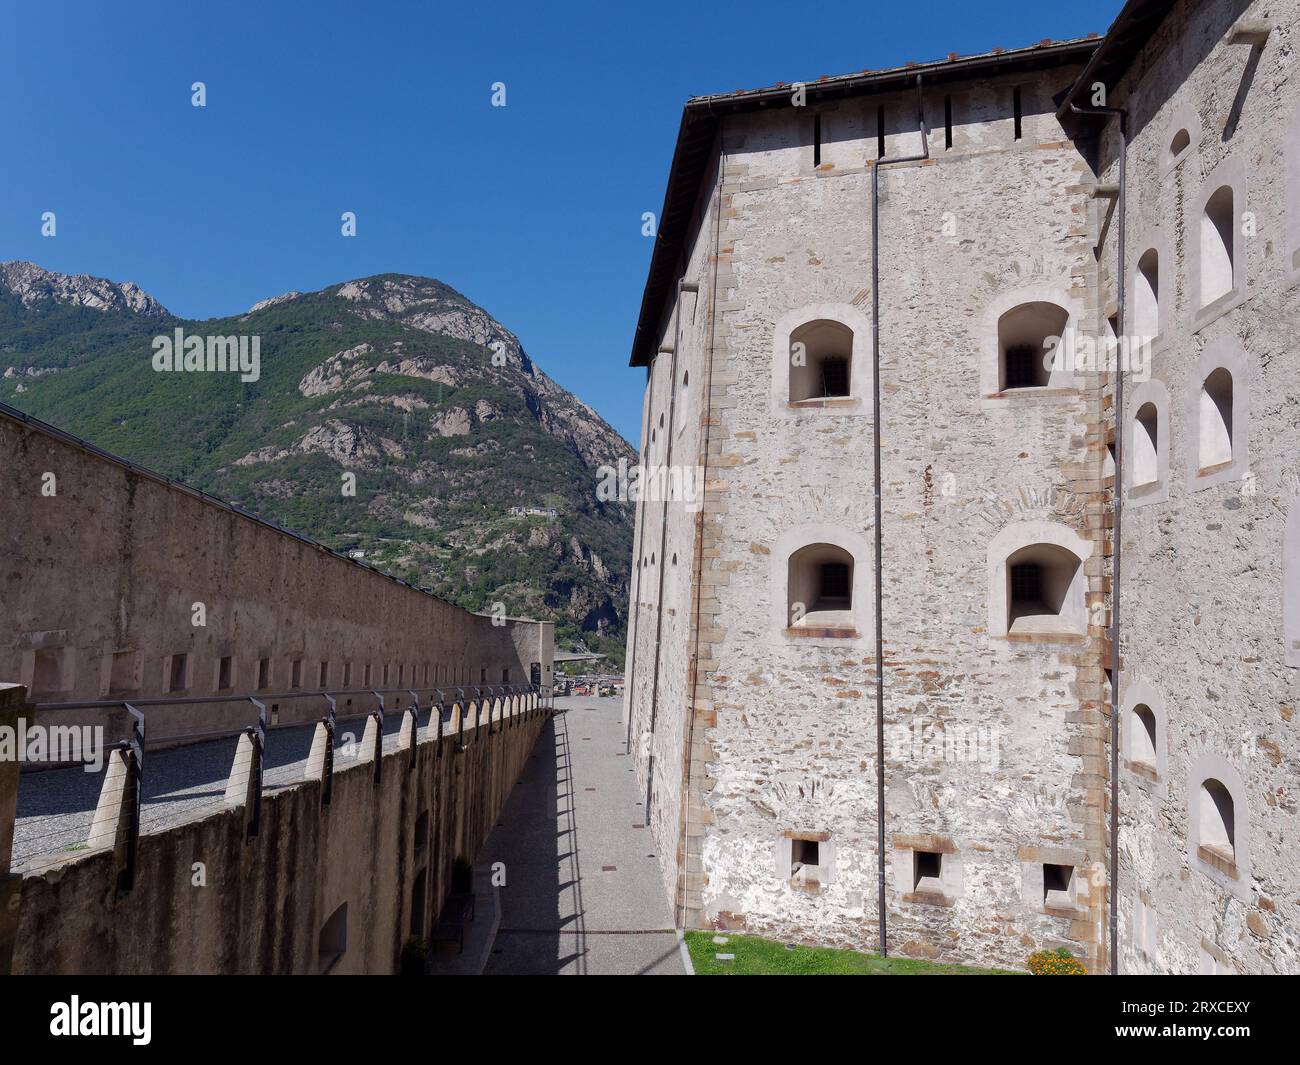 View from inside Forte di Bard (Fort of Bard) in the Aosta Valley Region NW Italy, September 24, 2023 Stock Photo